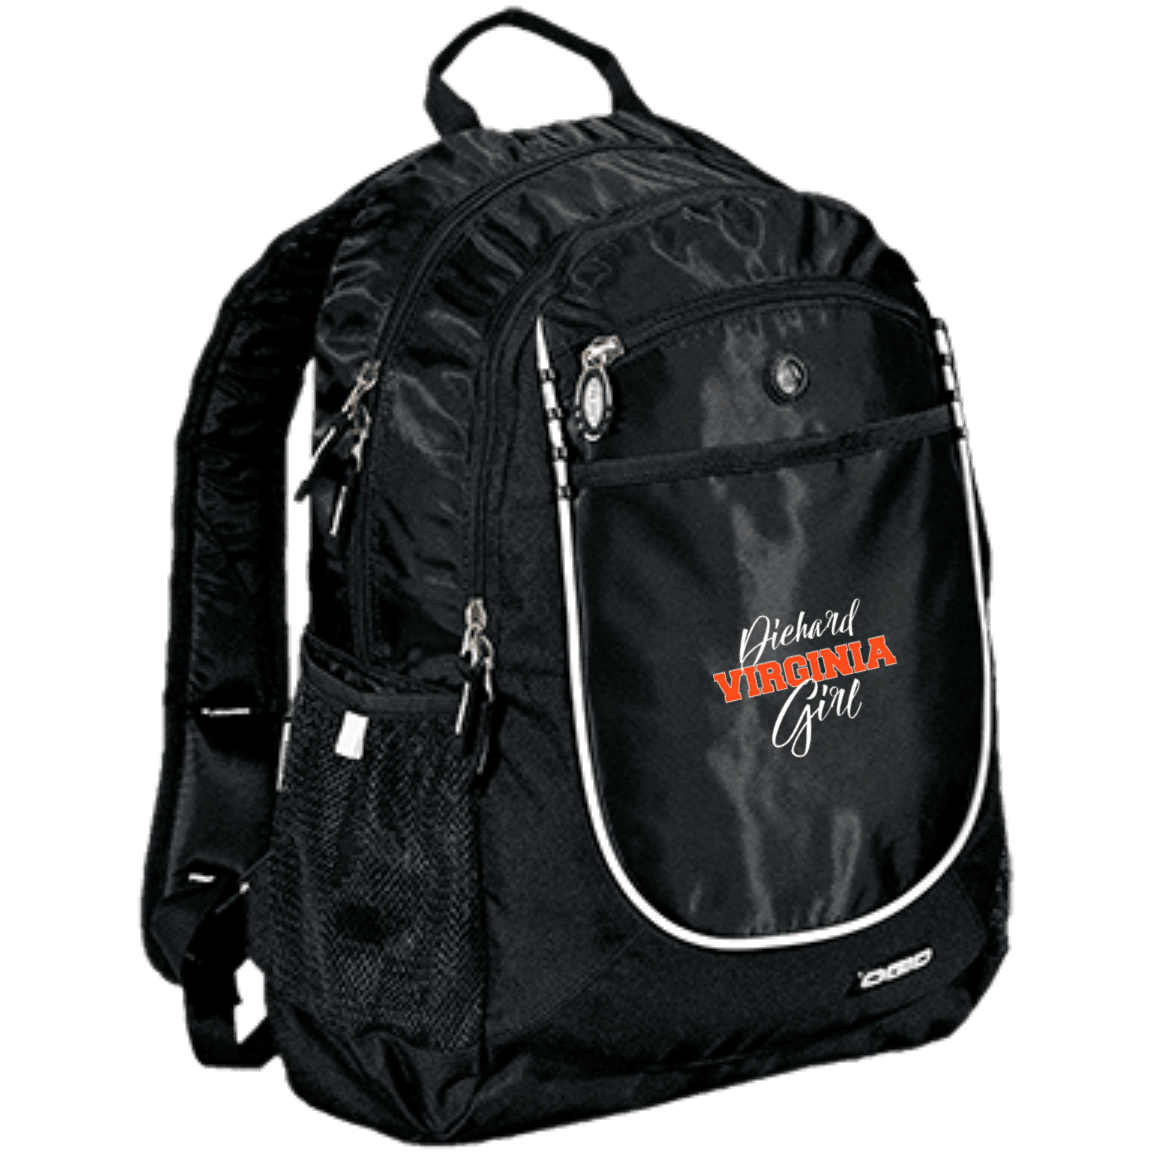 Designs by MyUtopia Shout Out:Diehard Virginia Girl Embroidered OGIO Rugged Bookbag Backpack - Black,Black / One Size,Backpacks